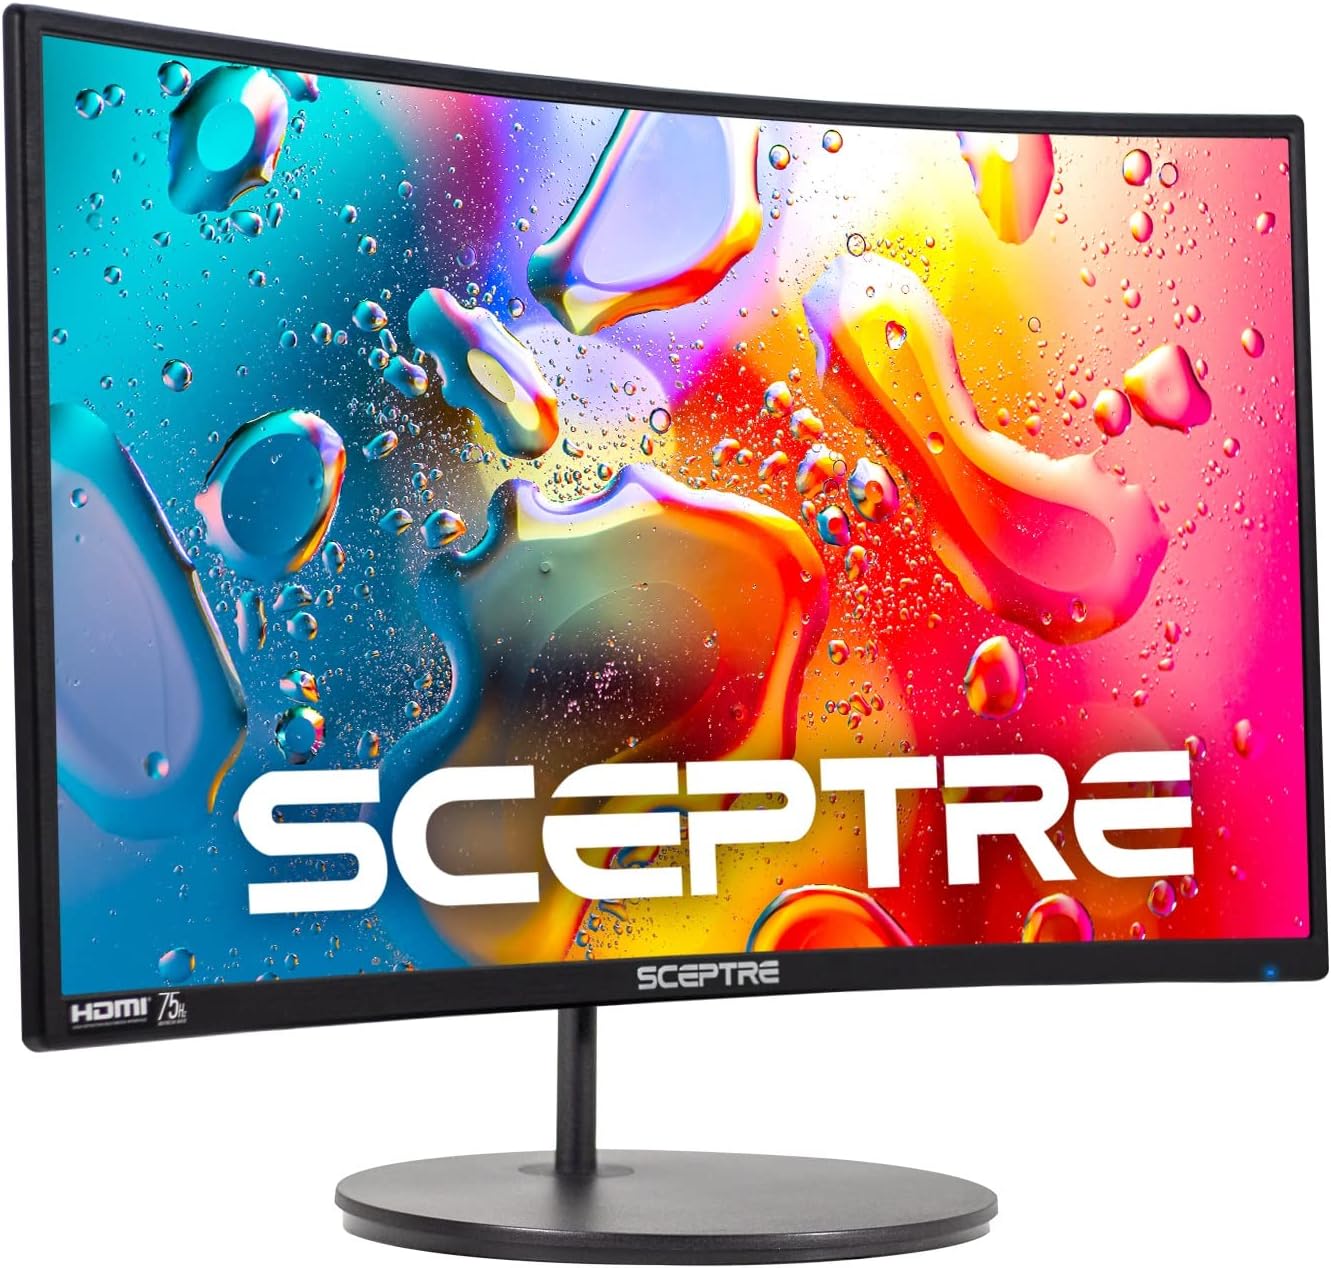 Sceptre Curved 24-inch Gaming Monitor Review